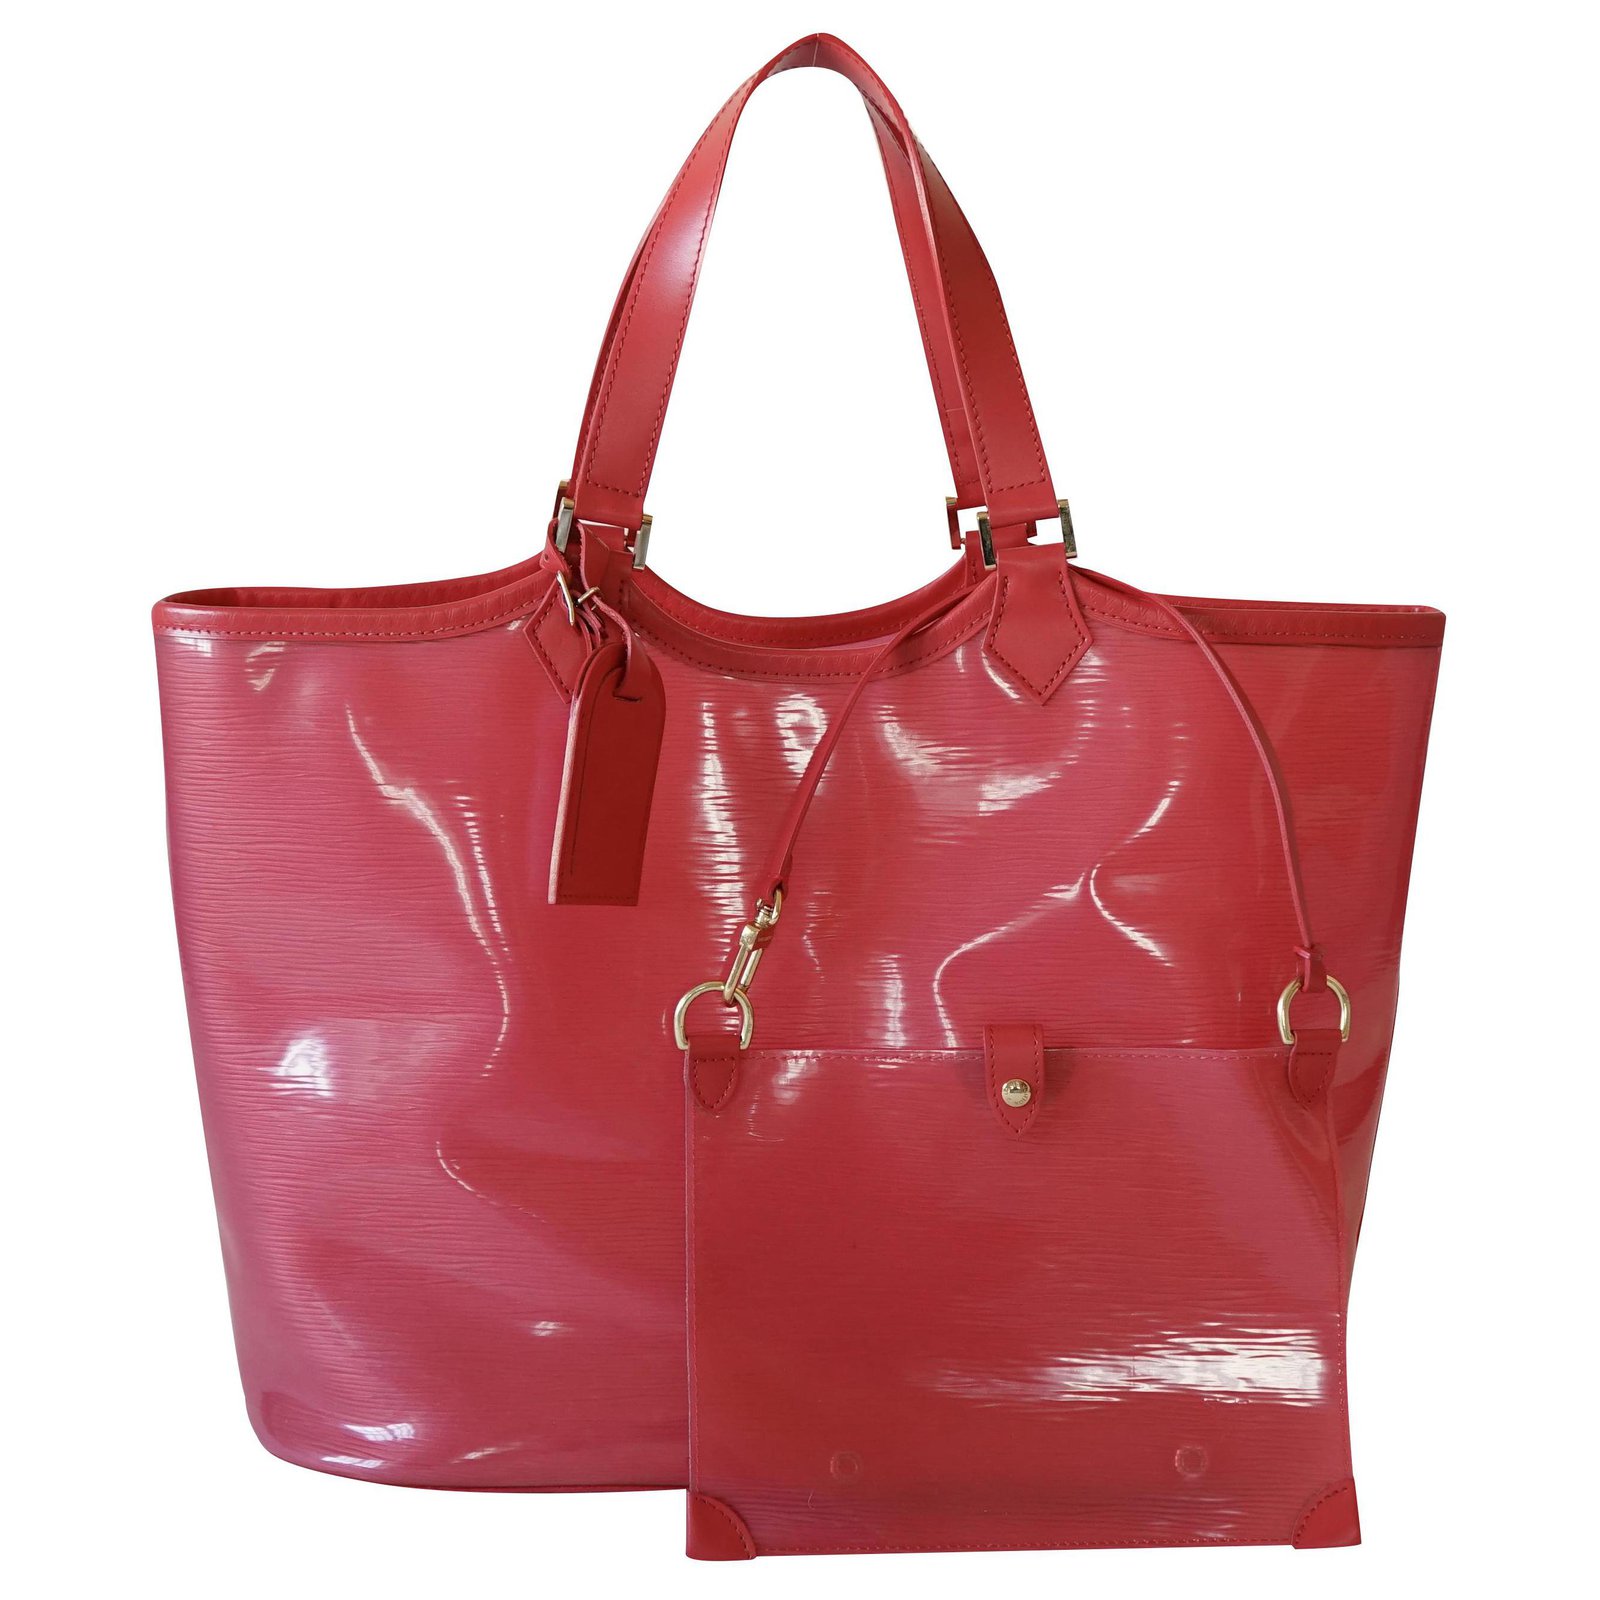 Louis Vuitton Leather Bags are Made from Plastic